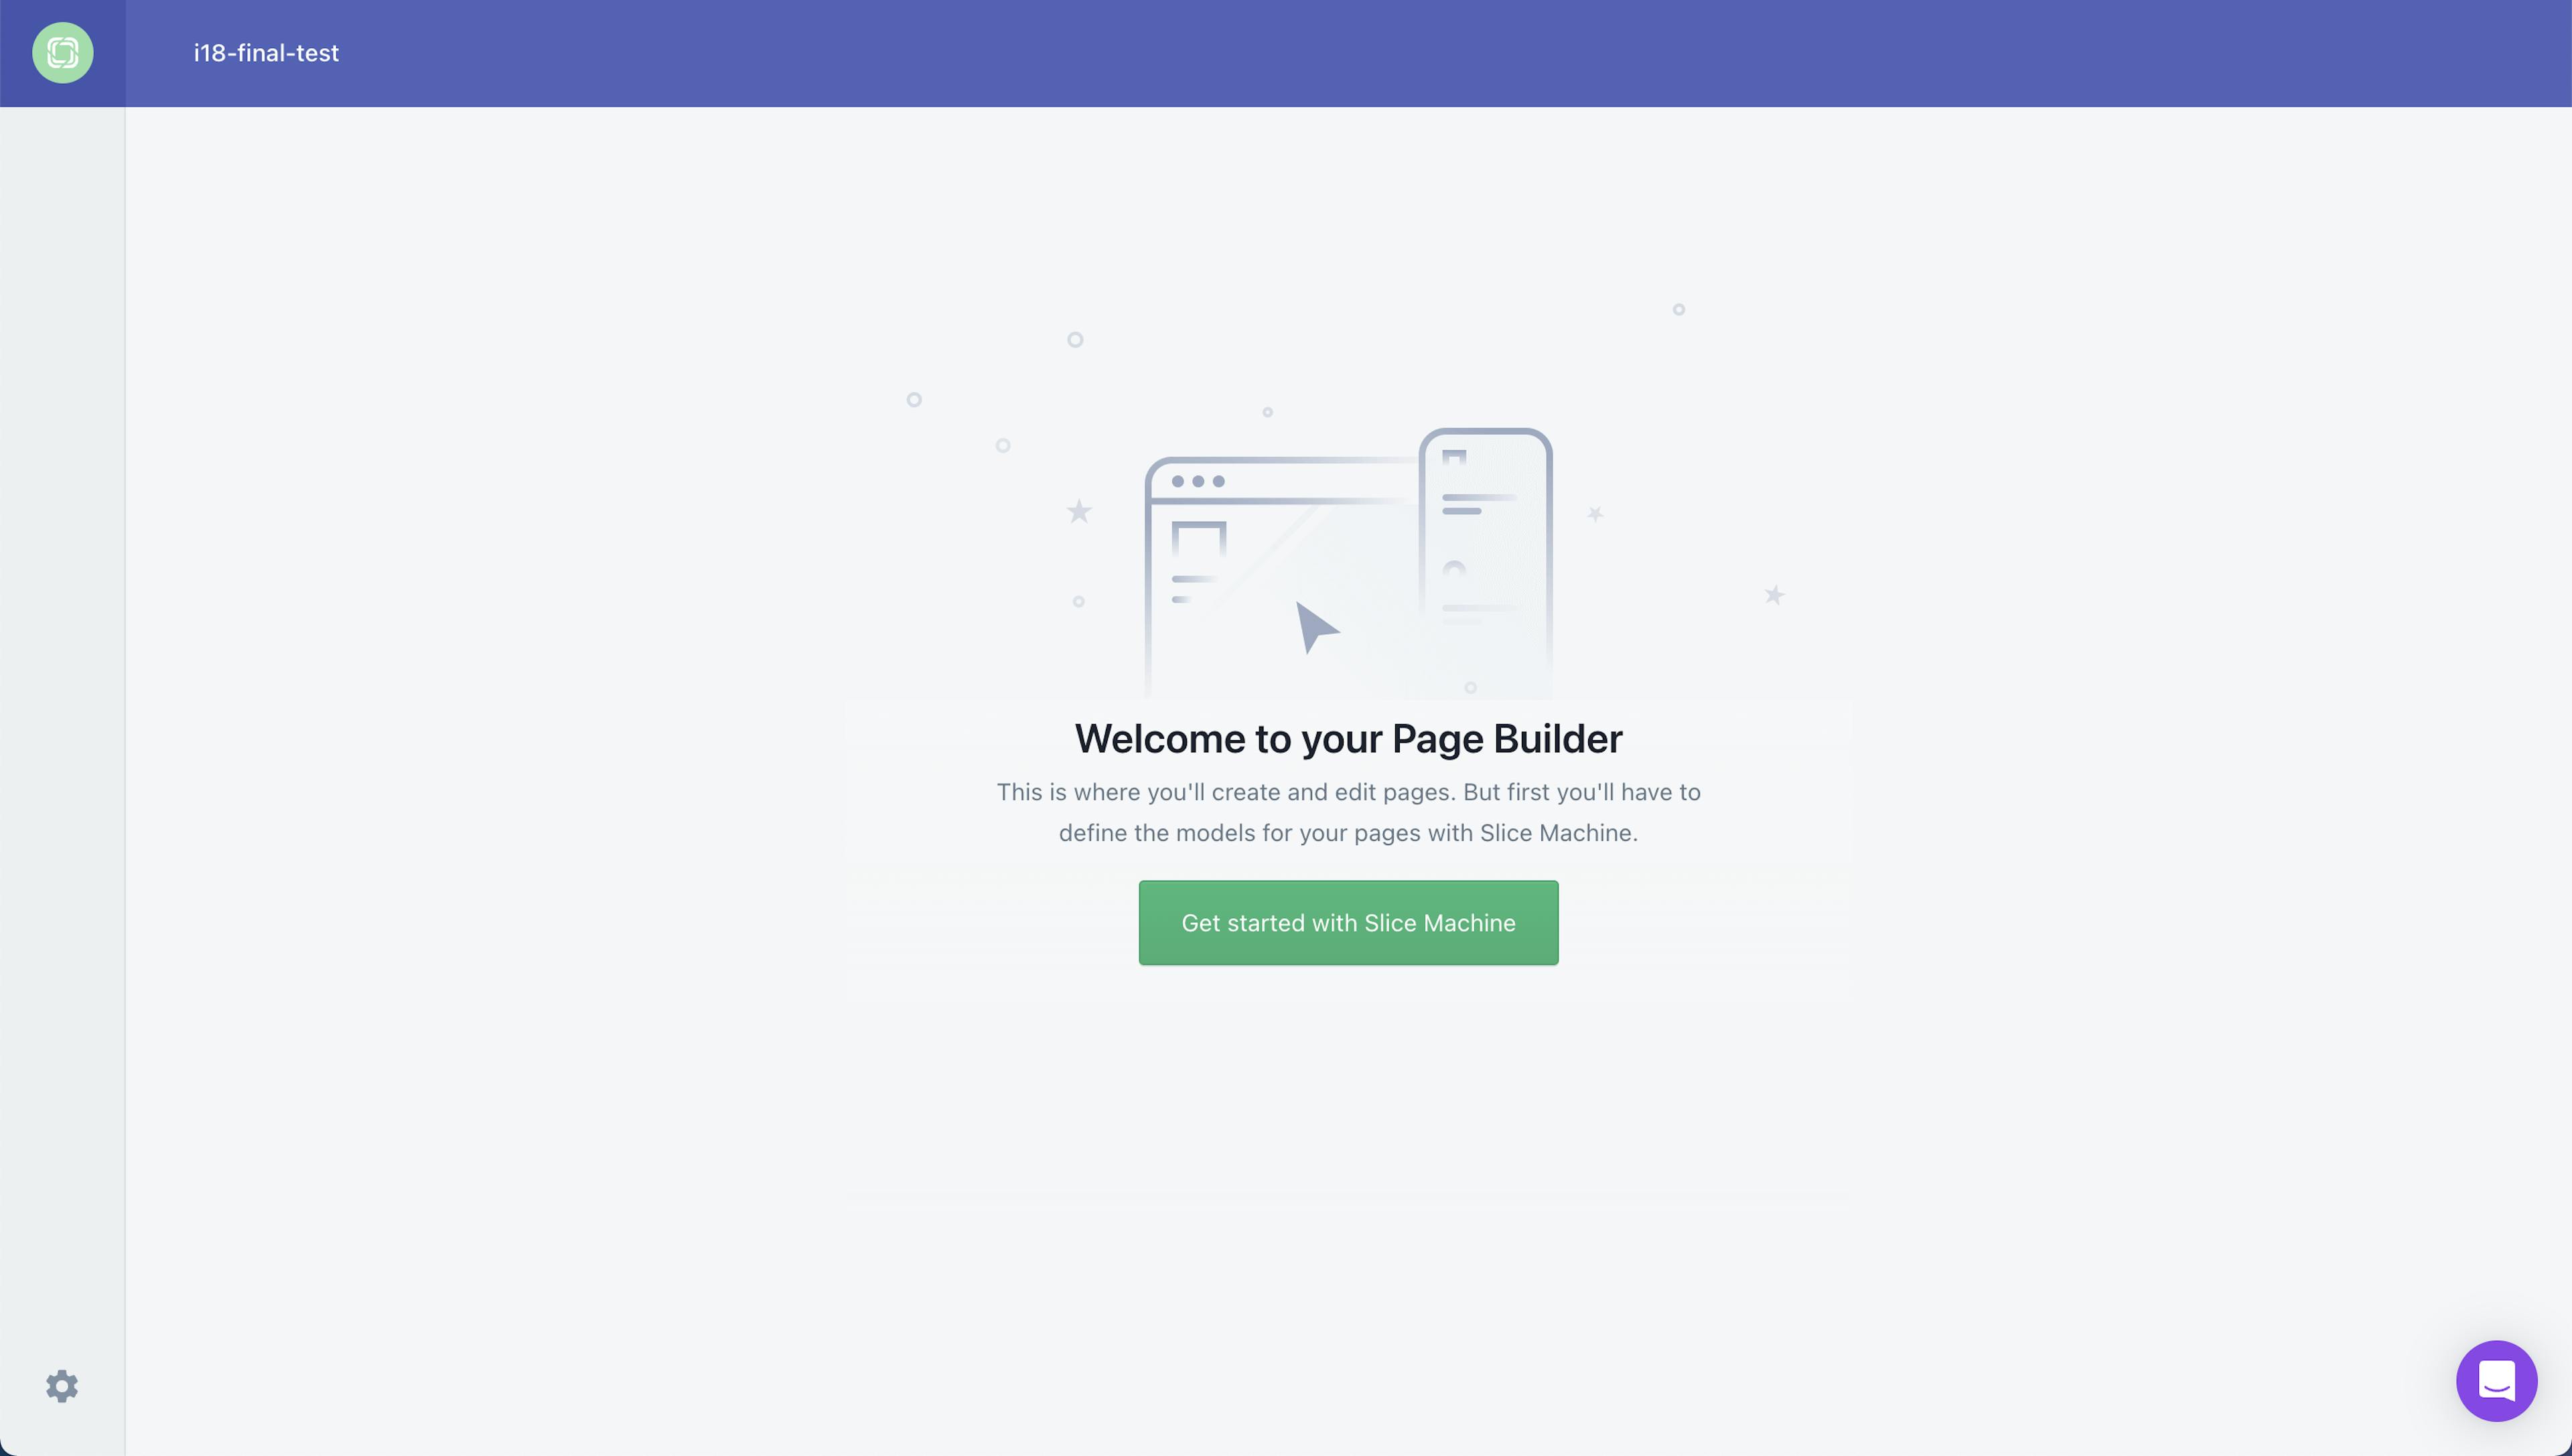 An image of the welcome screen of the Page Builder.